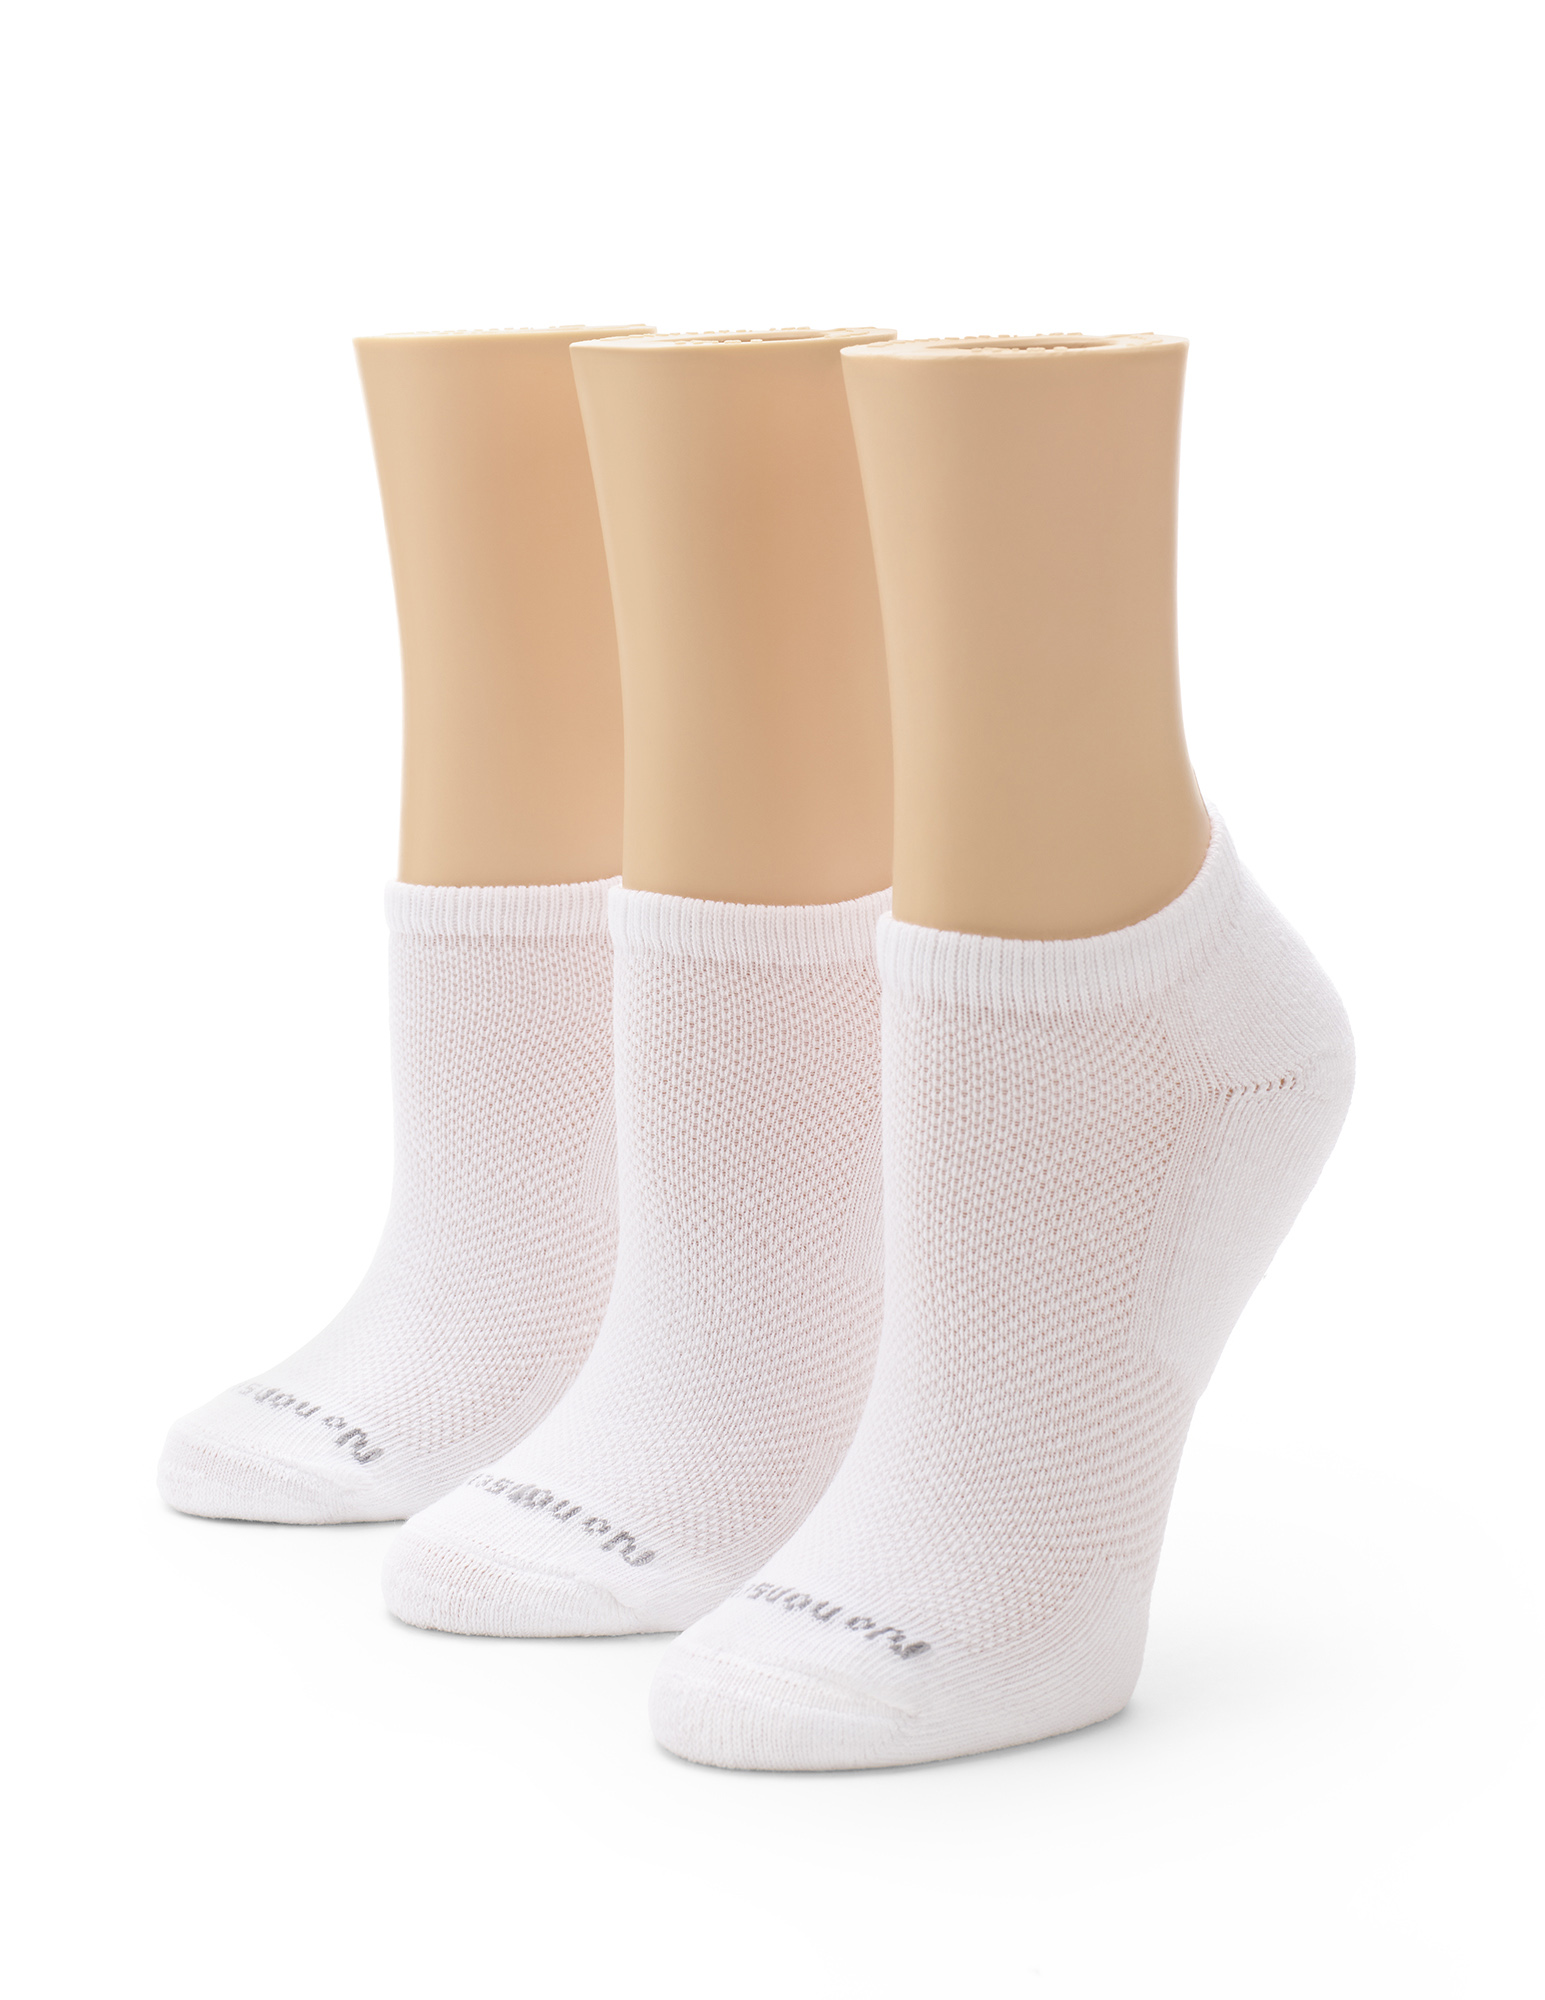 No nonsense Women's Soft & Breathable Half Cushioned Ventilated No Show Socks 3 Pair Pack White 9-12 - image 1 of 2